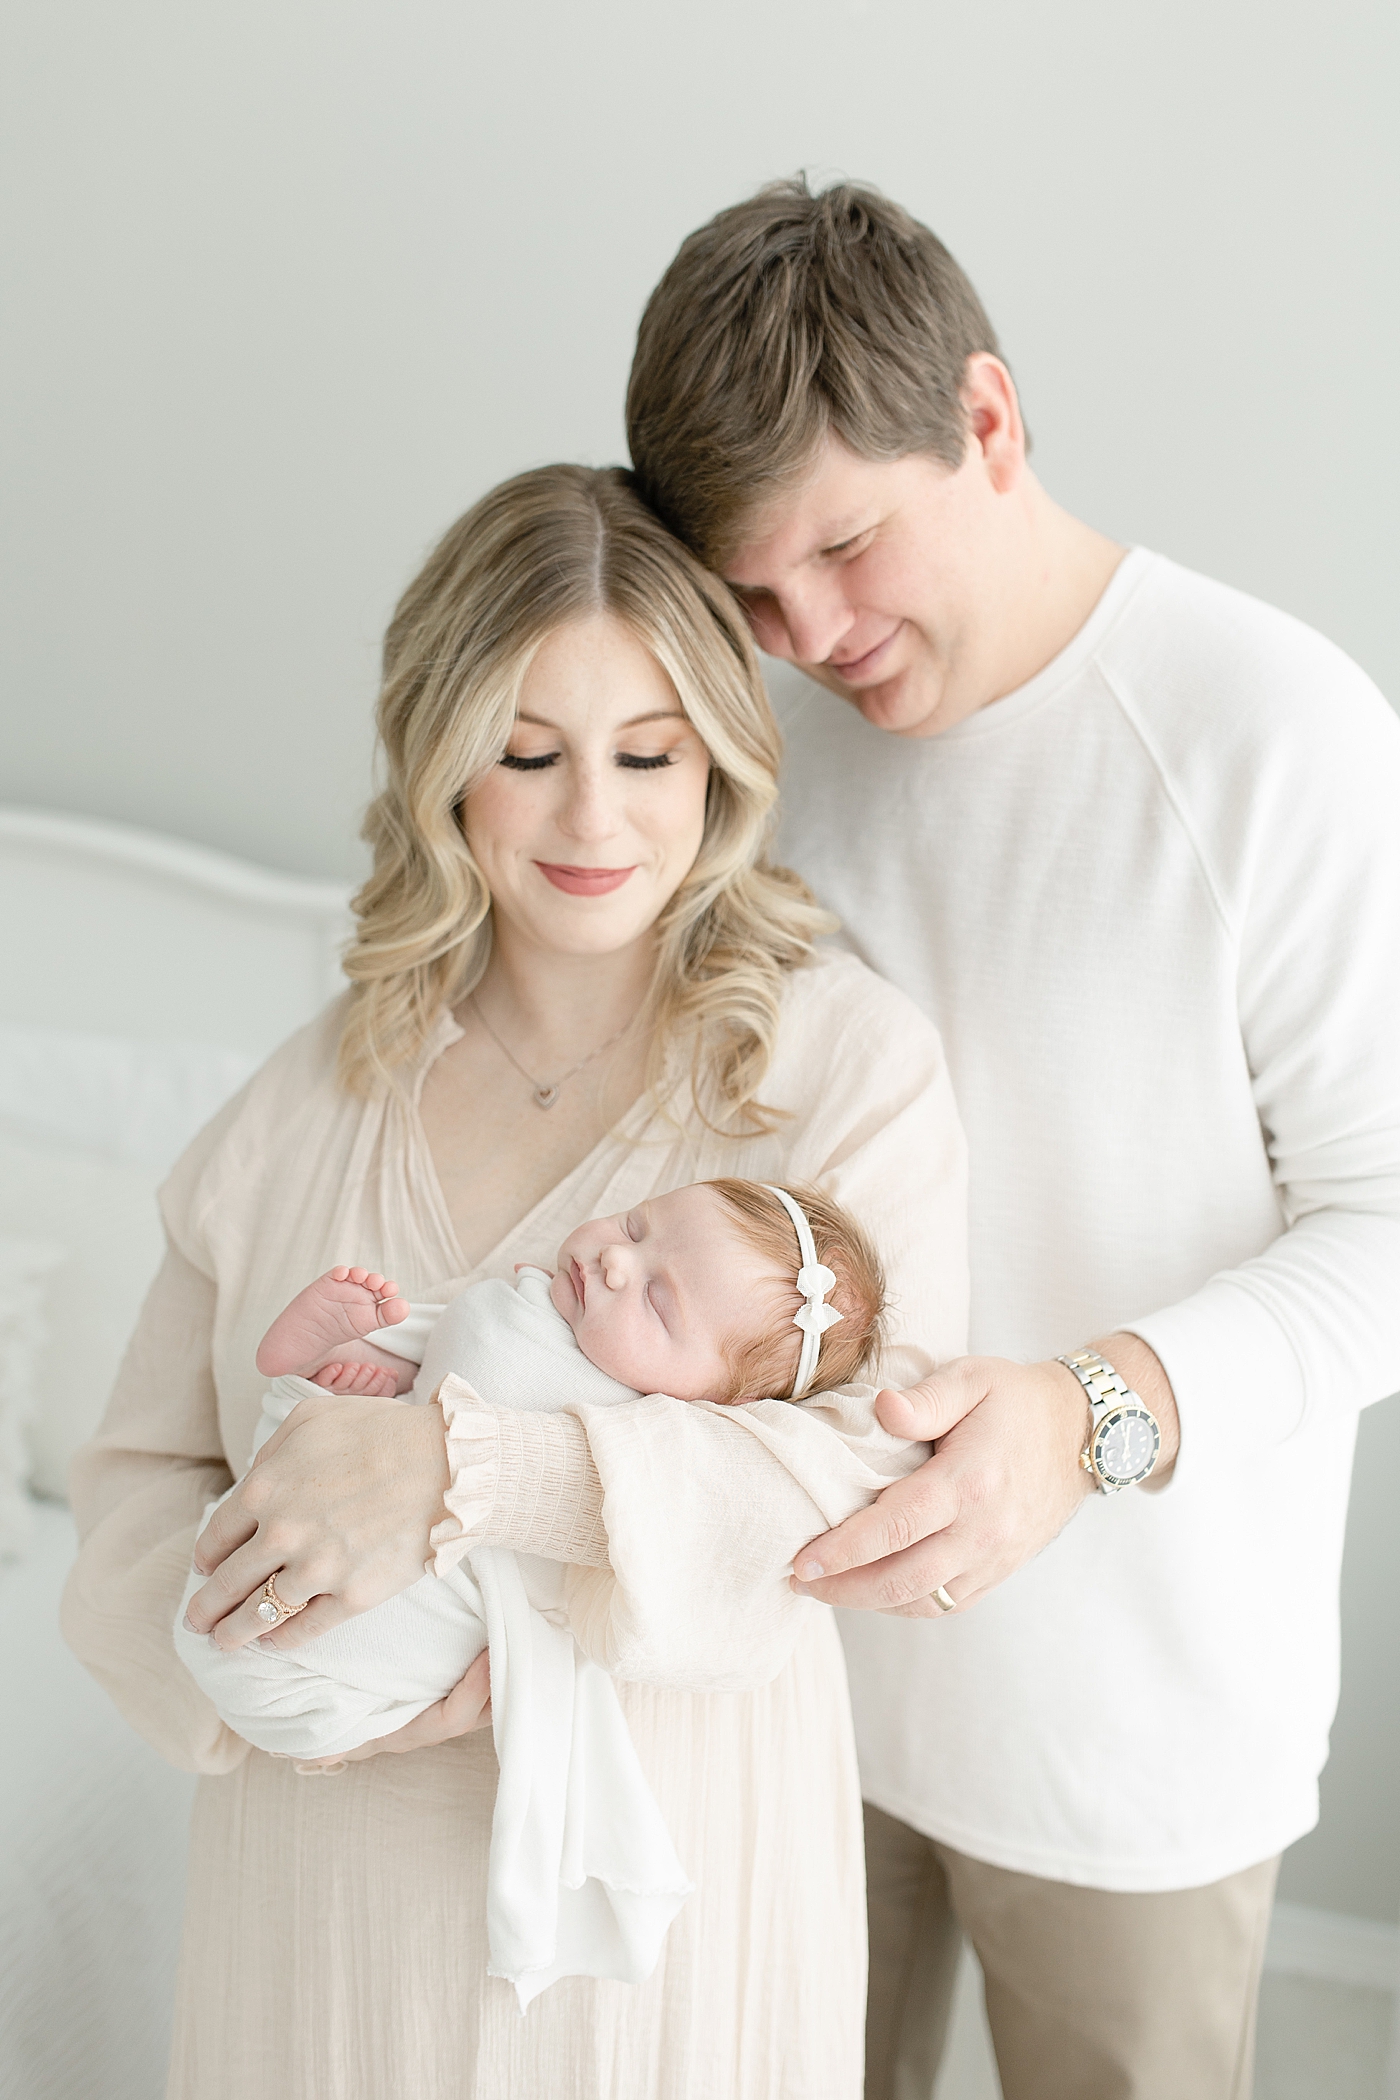 Mom and dad in neutrals holding their newborn baby girl | Photo by Little Sunshine Photography